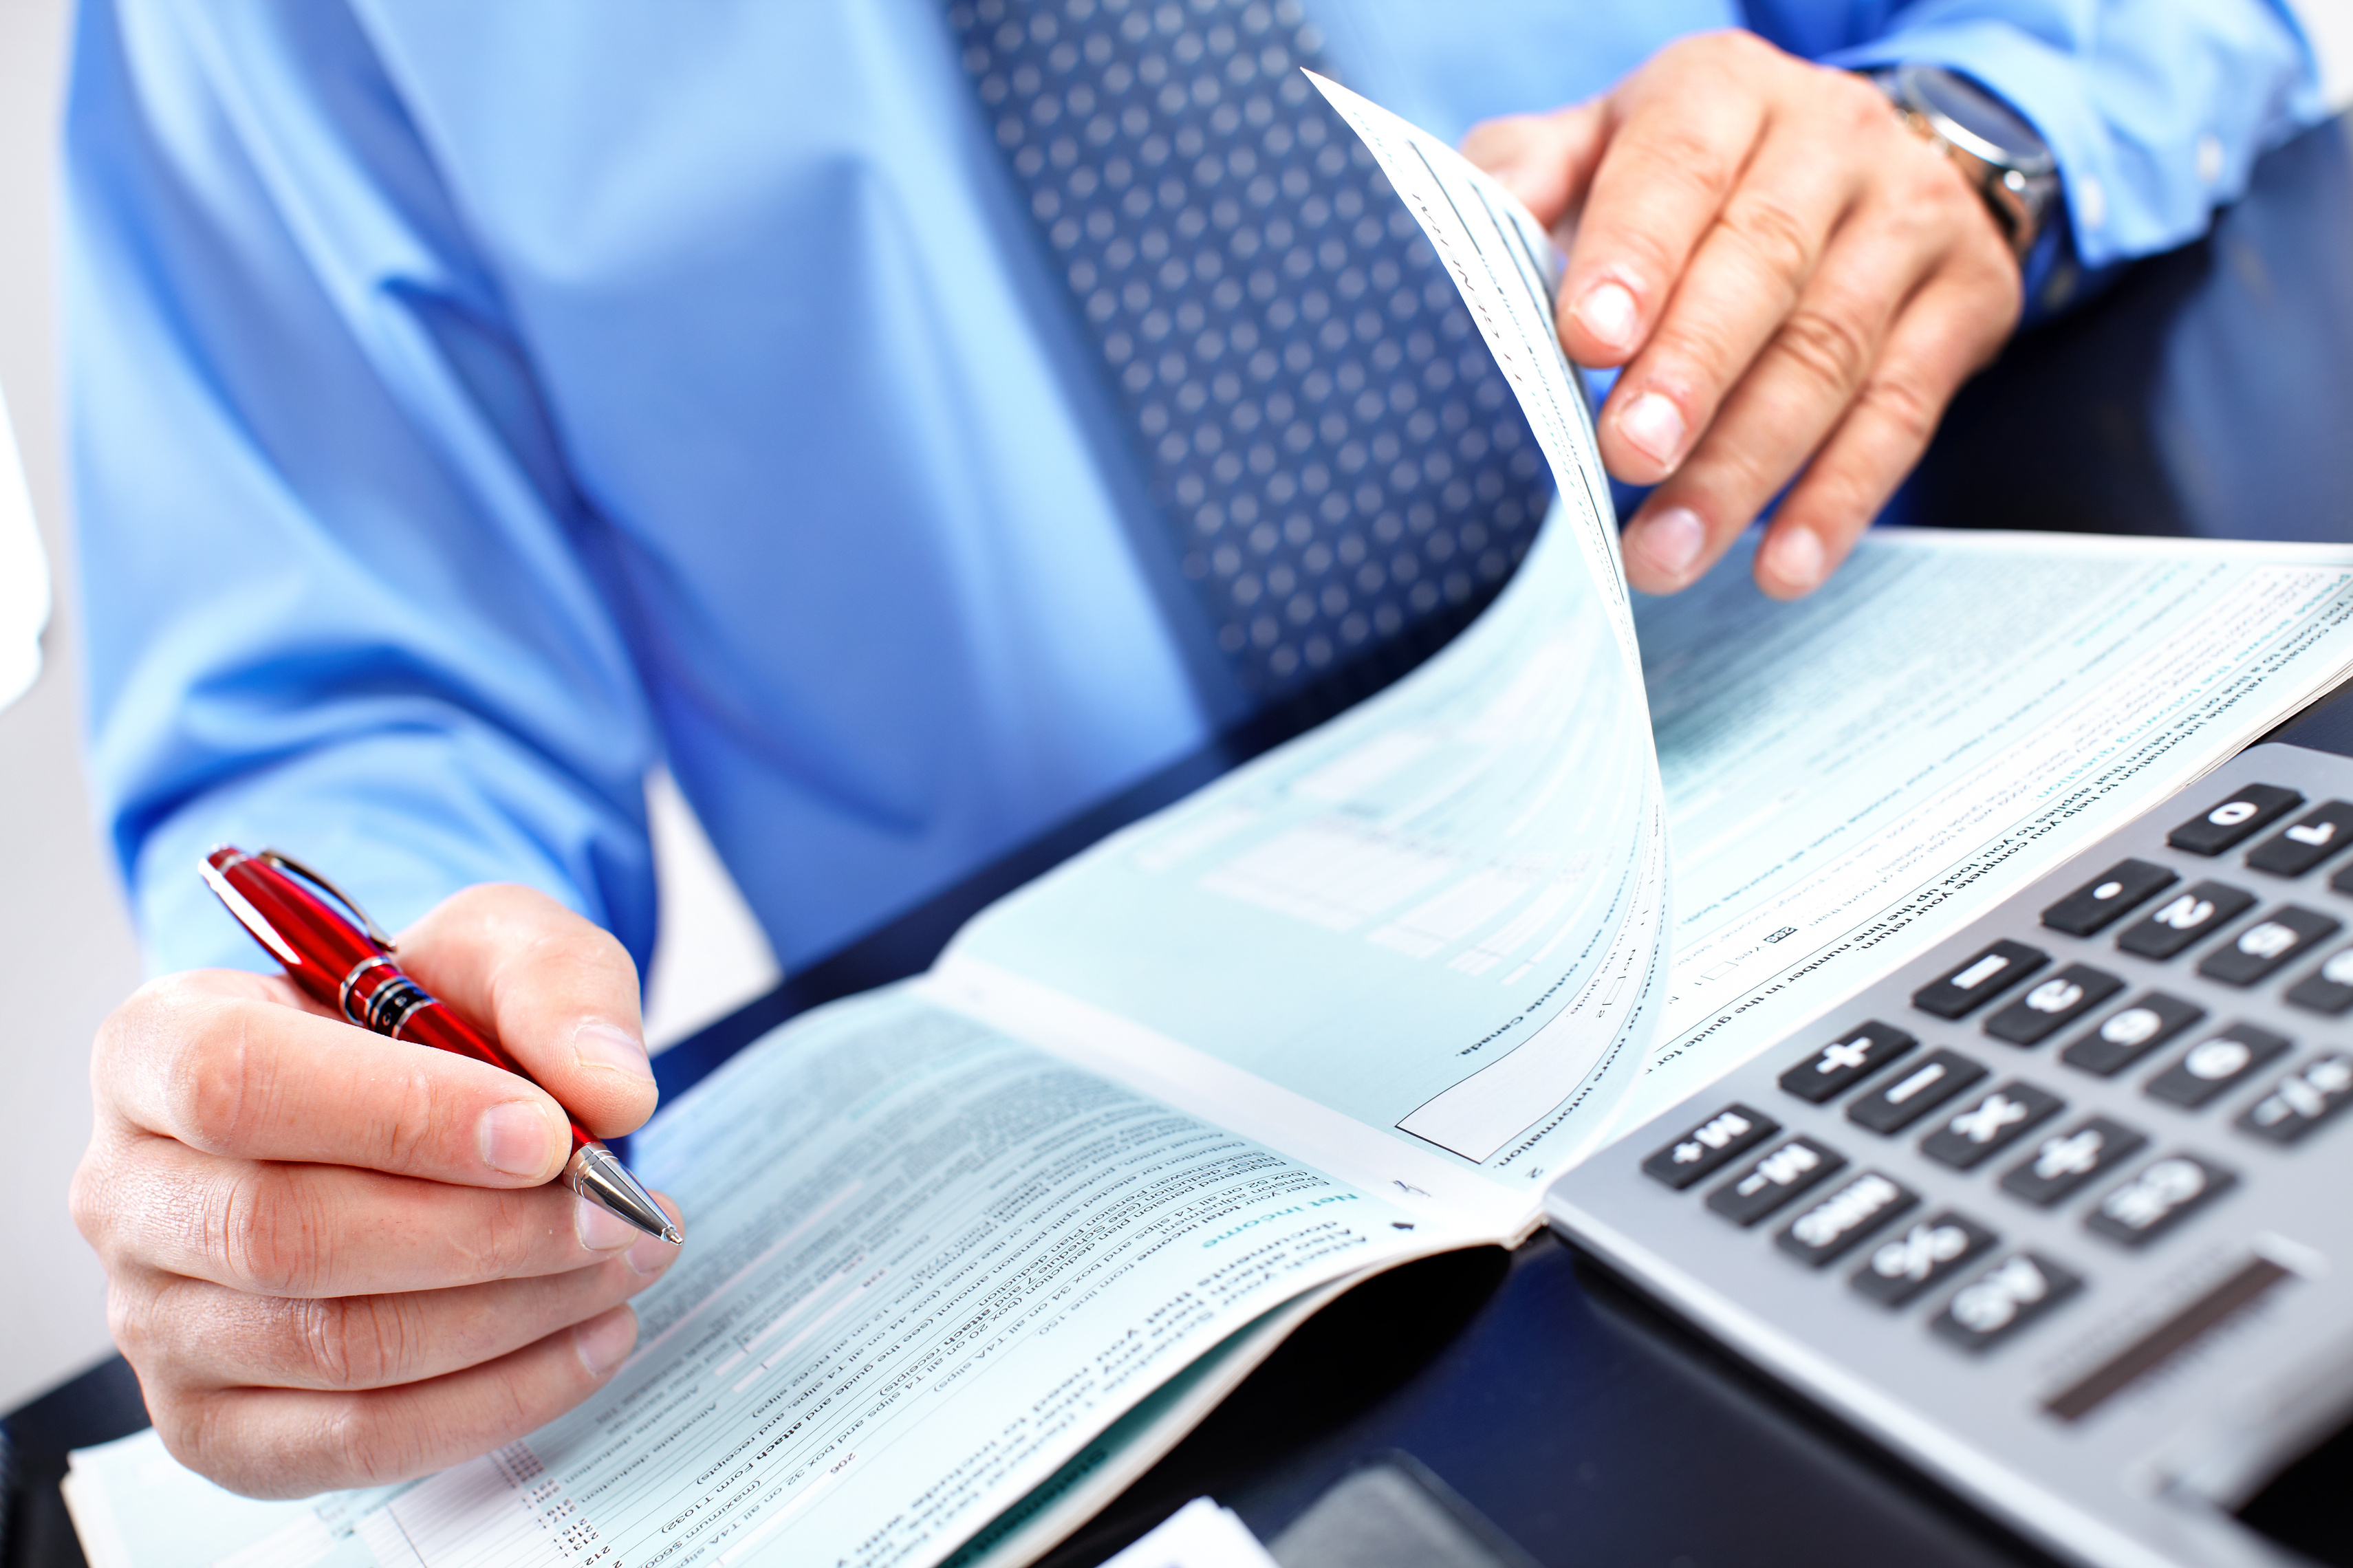 Business Accounting Firms Offer Services To Simplify Your Finances